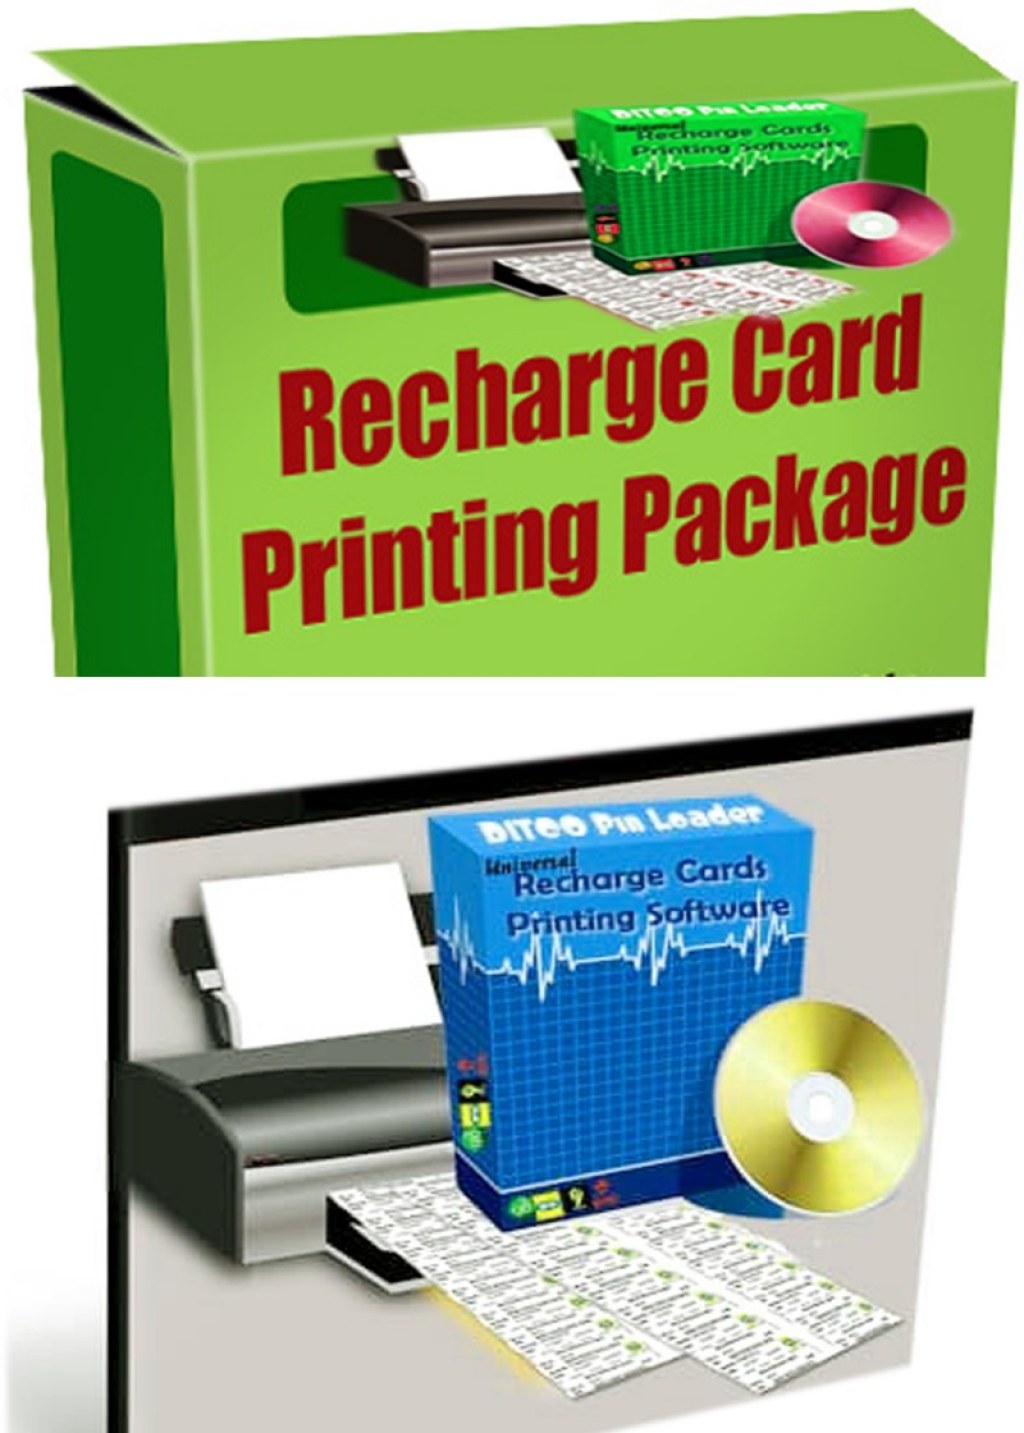 recharge card printing business 2022 - Buy How to Start Recharge Card Printing Business In Nigeria by